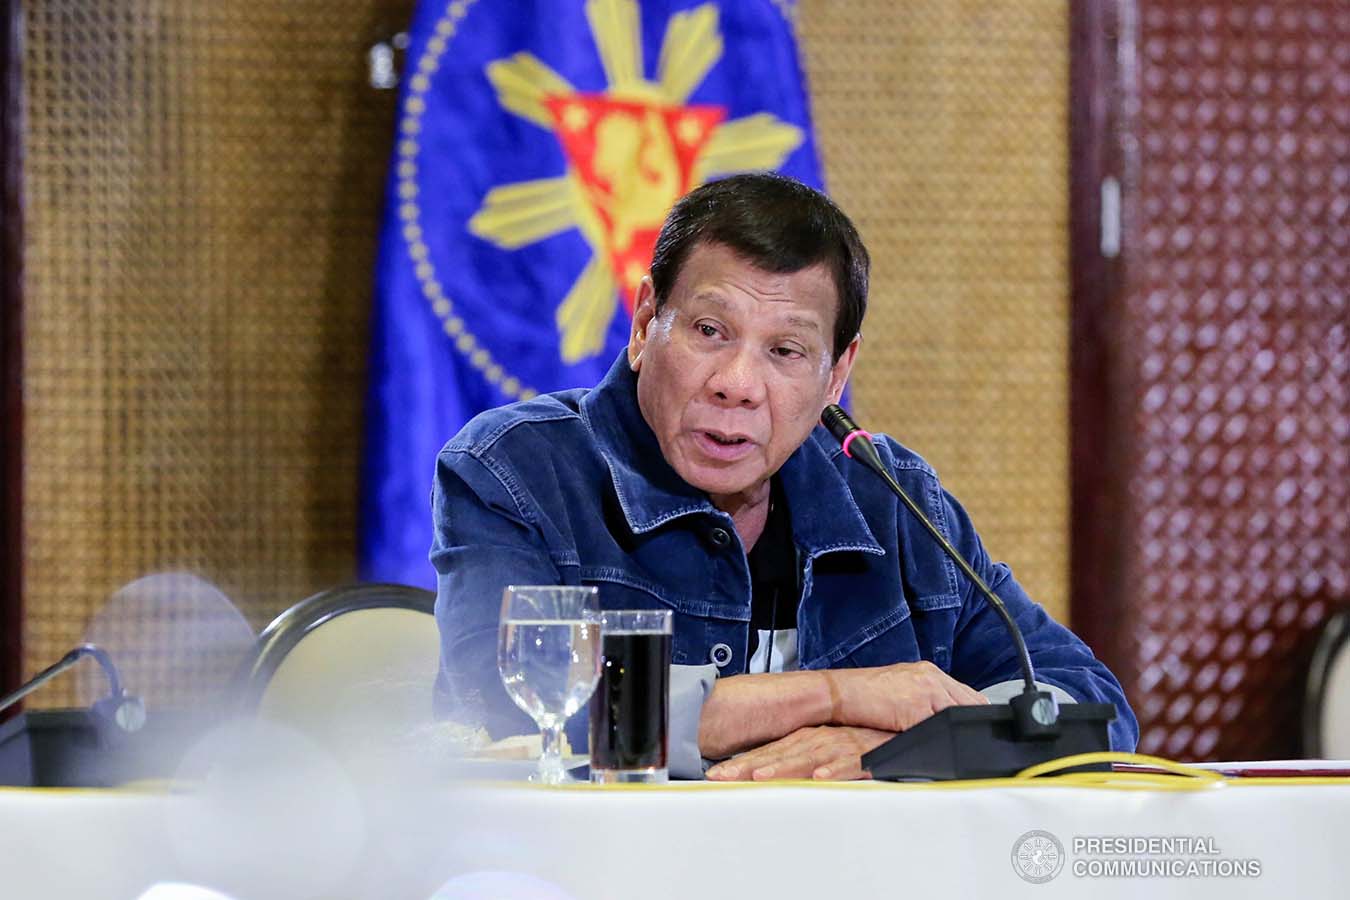 President Rodrigo Roa Duterte presides over a meeting with the Inter-Agency Task Force on the Emerging Infectious Diseases (IATF-EID) at the Malacañan Palace on March 12, 2020. RICHARD MADELO/PRESIDENTIAL PHOTO